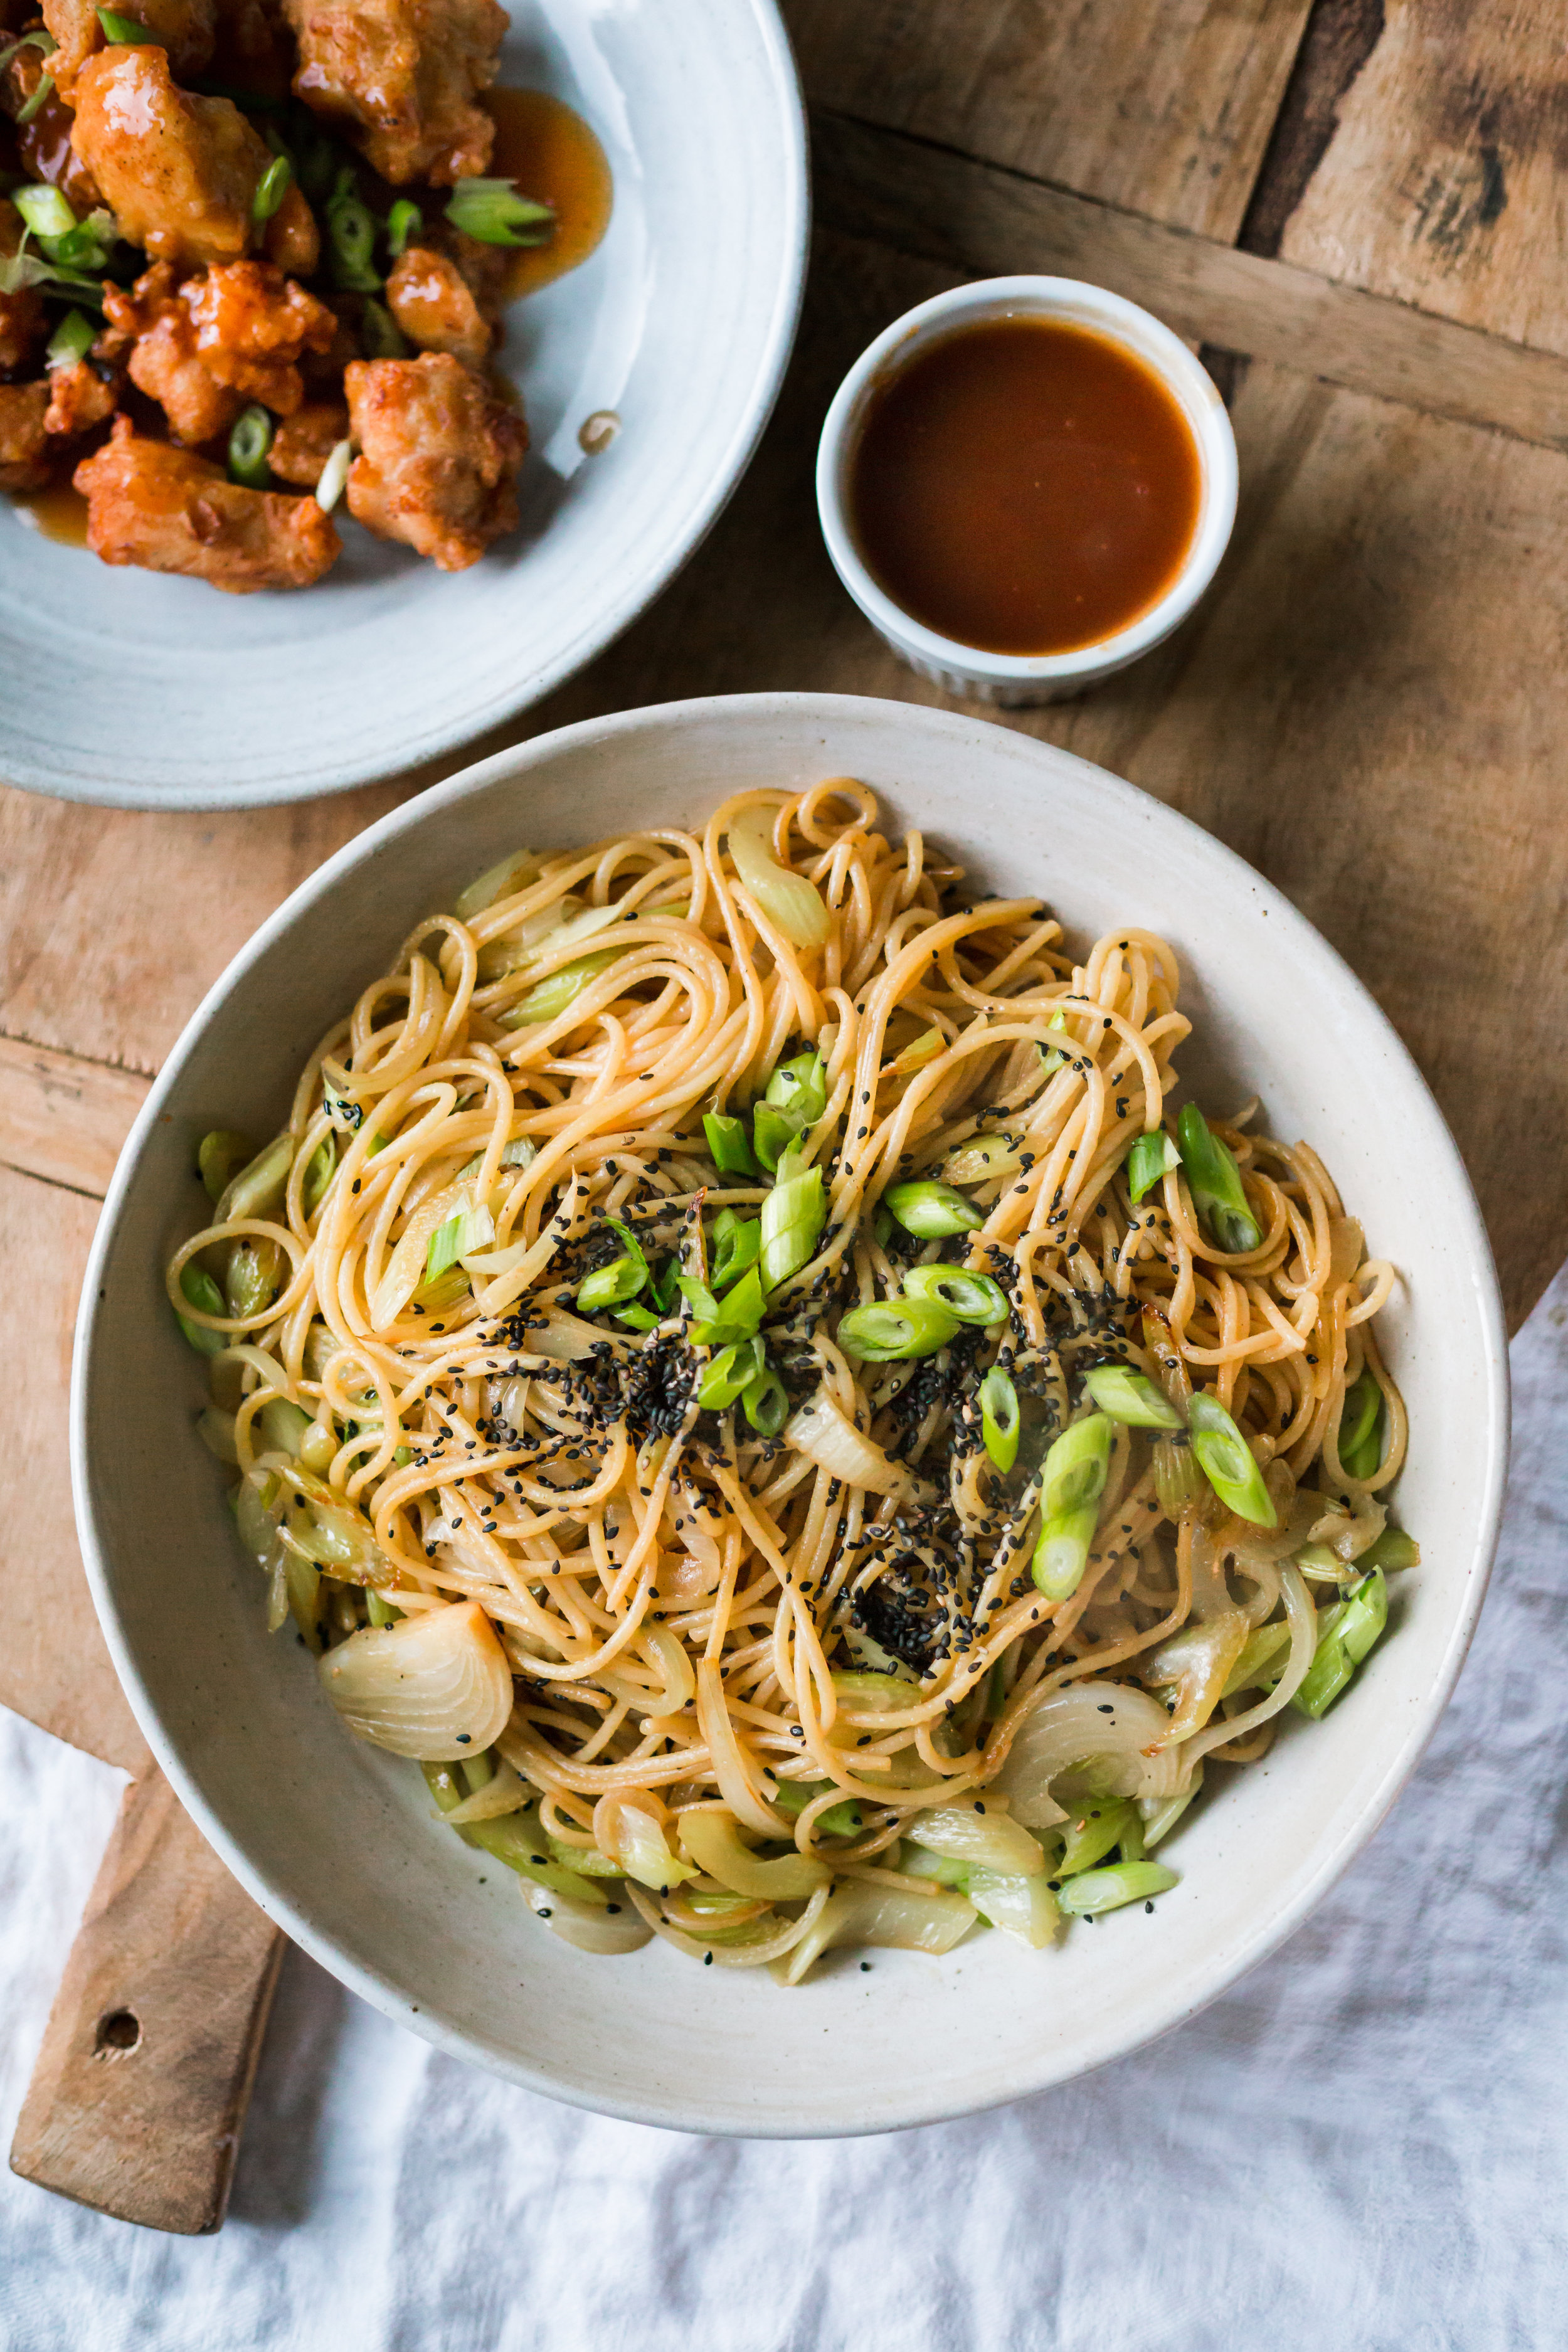 Sweet 'n' Sour Chicken Chow Mein with Rachael Ray - Rustic Joyful Food